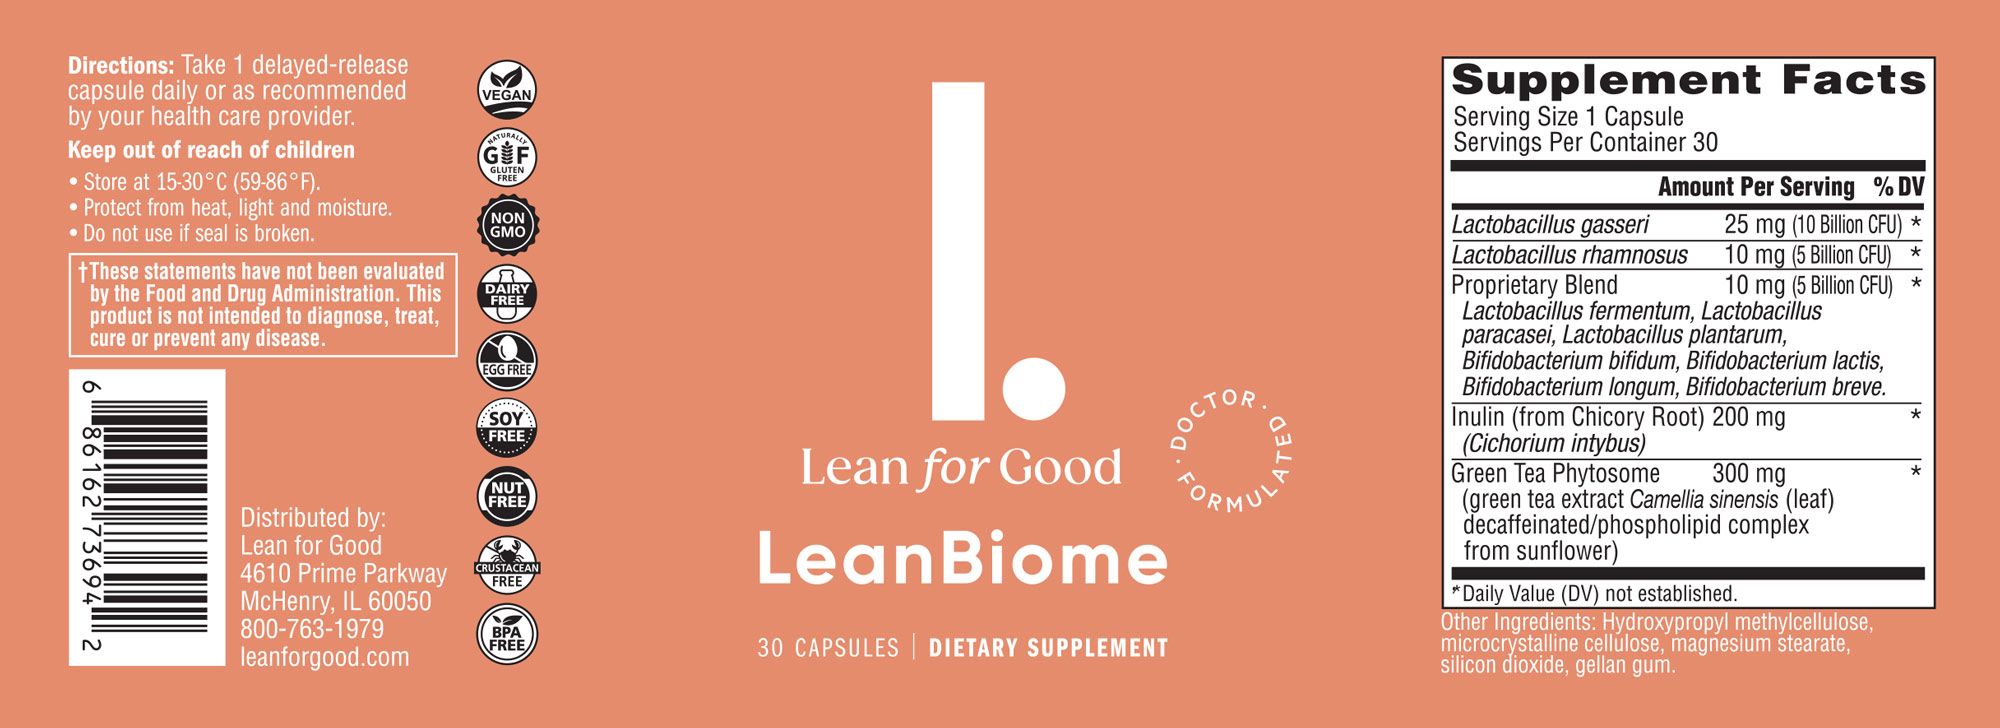 LeanBiome weight loss supplement Facts